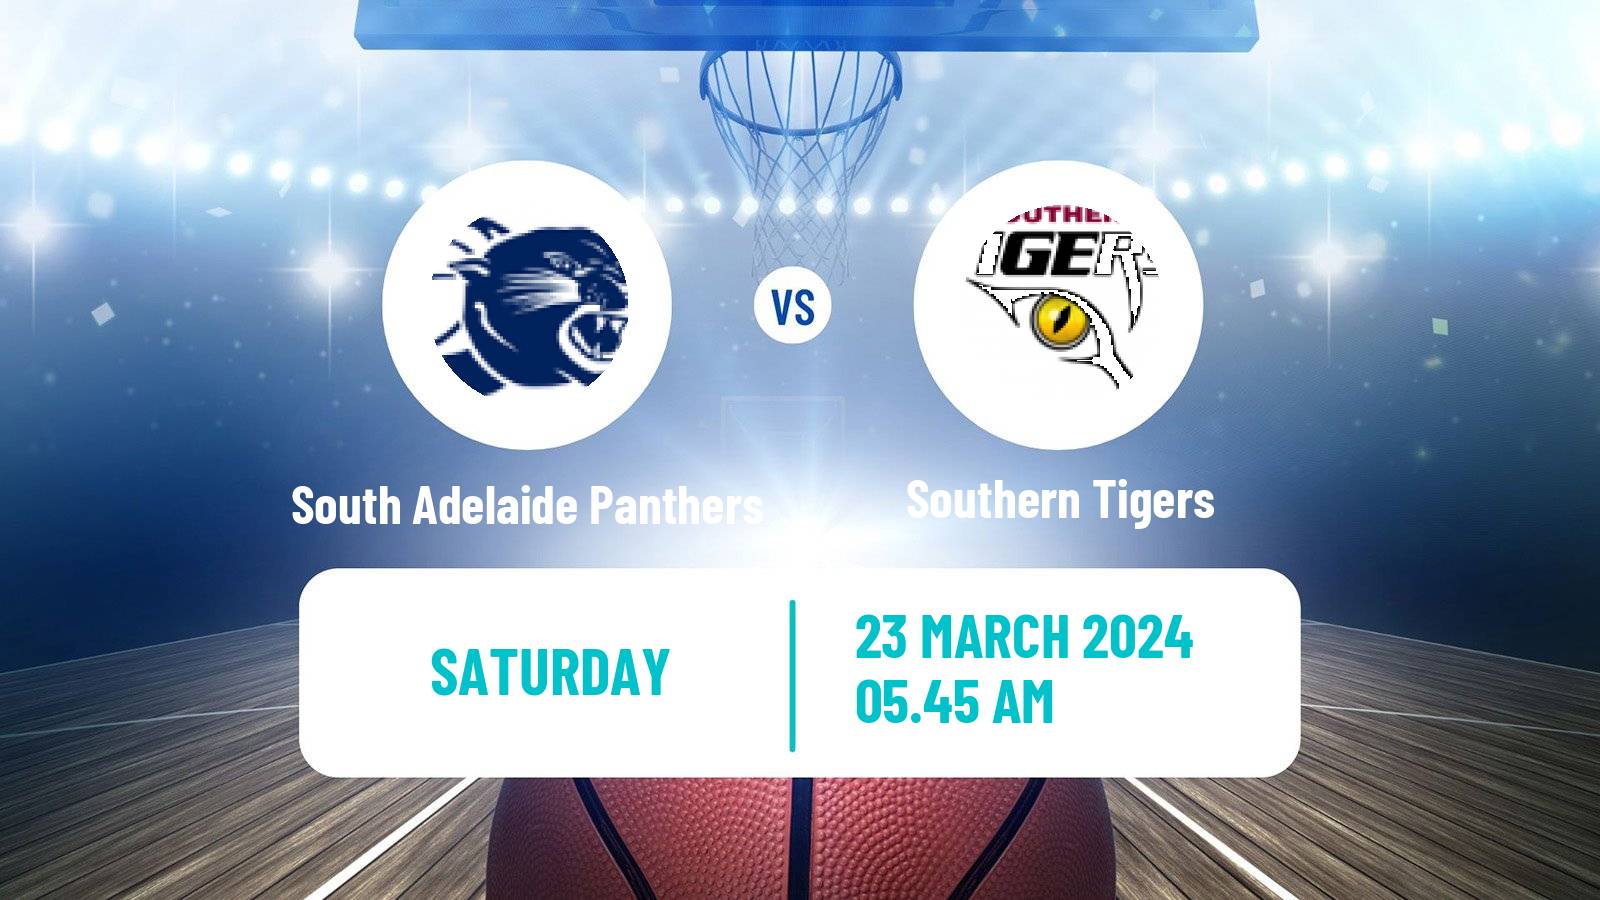 Basketball Australian NBL1 Central South Adelaide Panthers - Southern Tigers